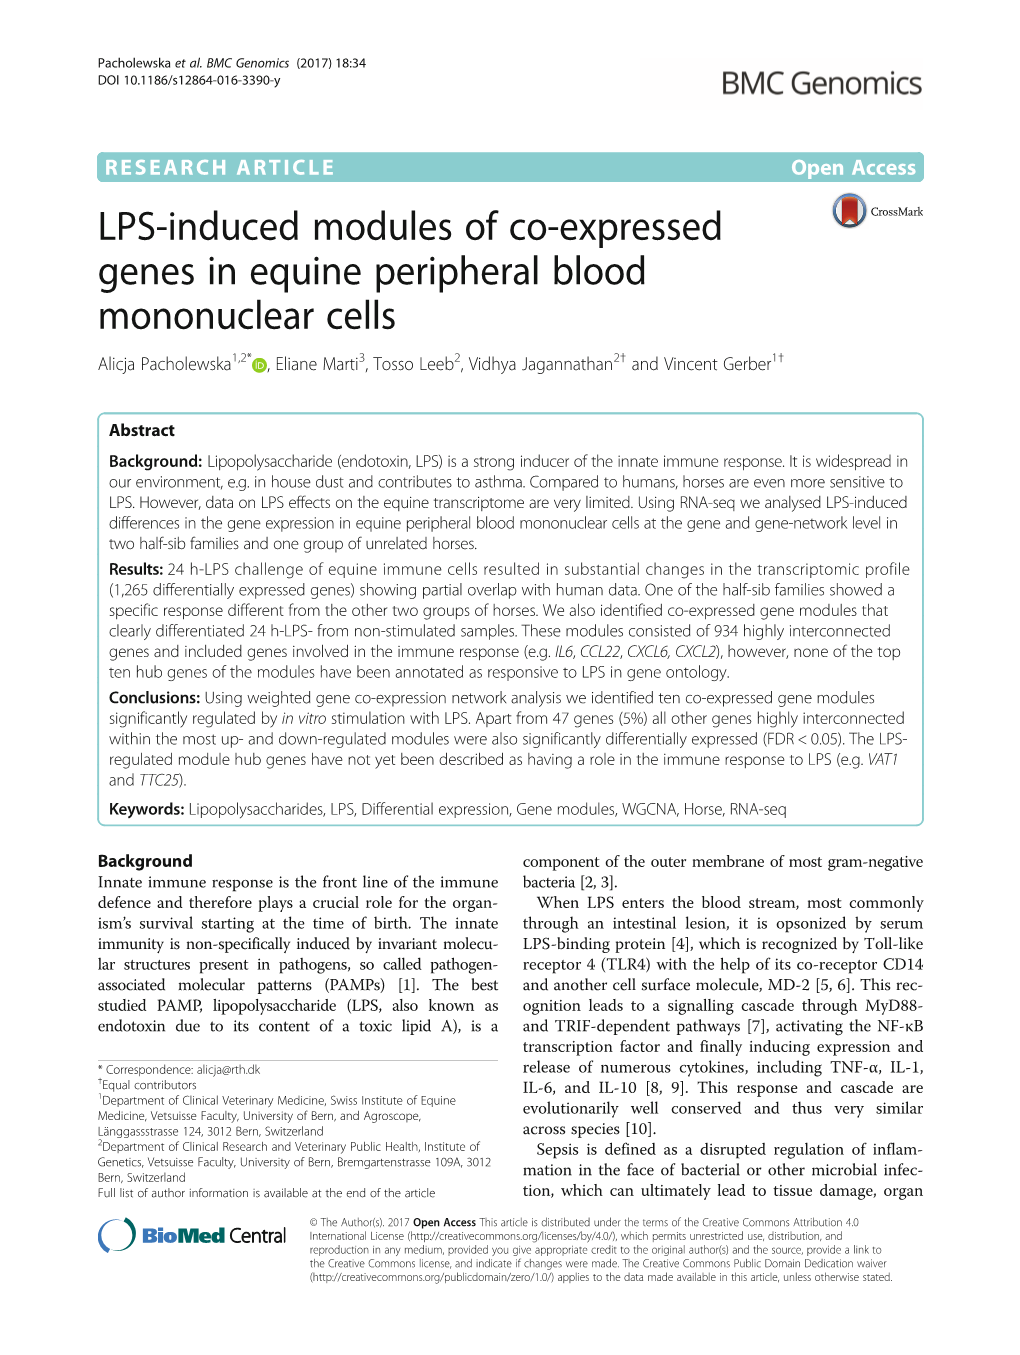 LPS-Induced Modules of Co-Expressed Genes in Equine